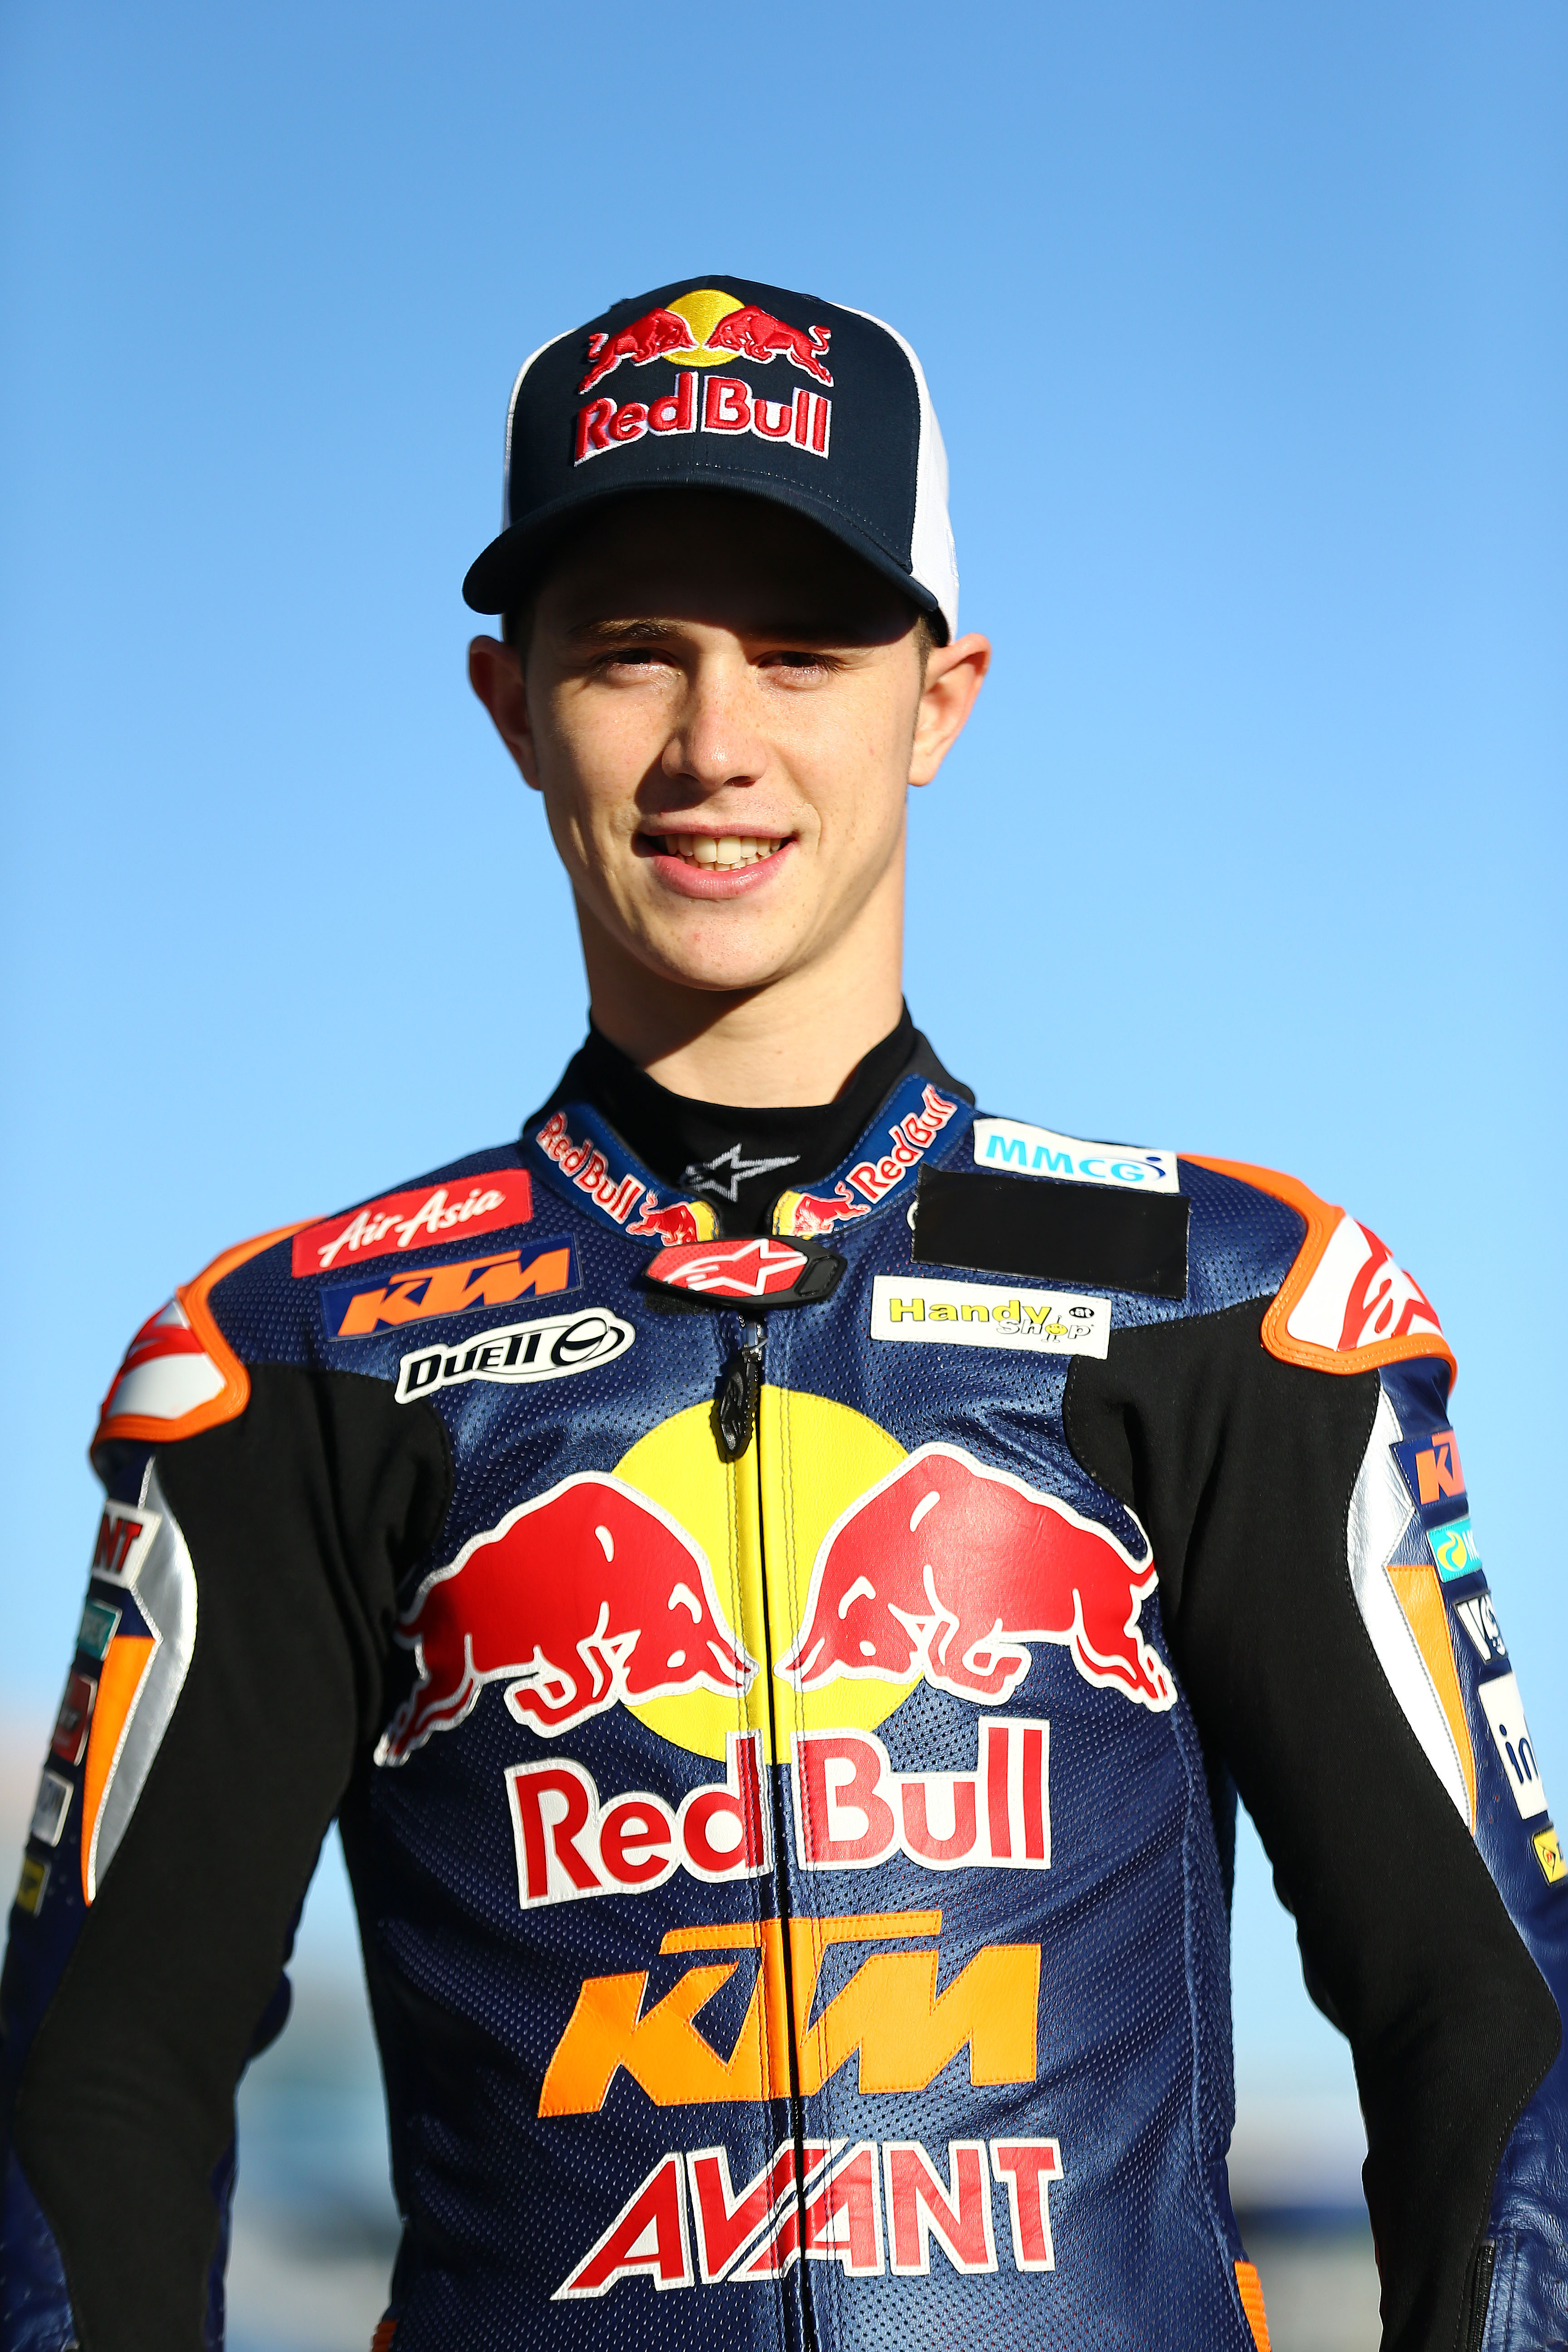 Danny Kent: Seven things I know